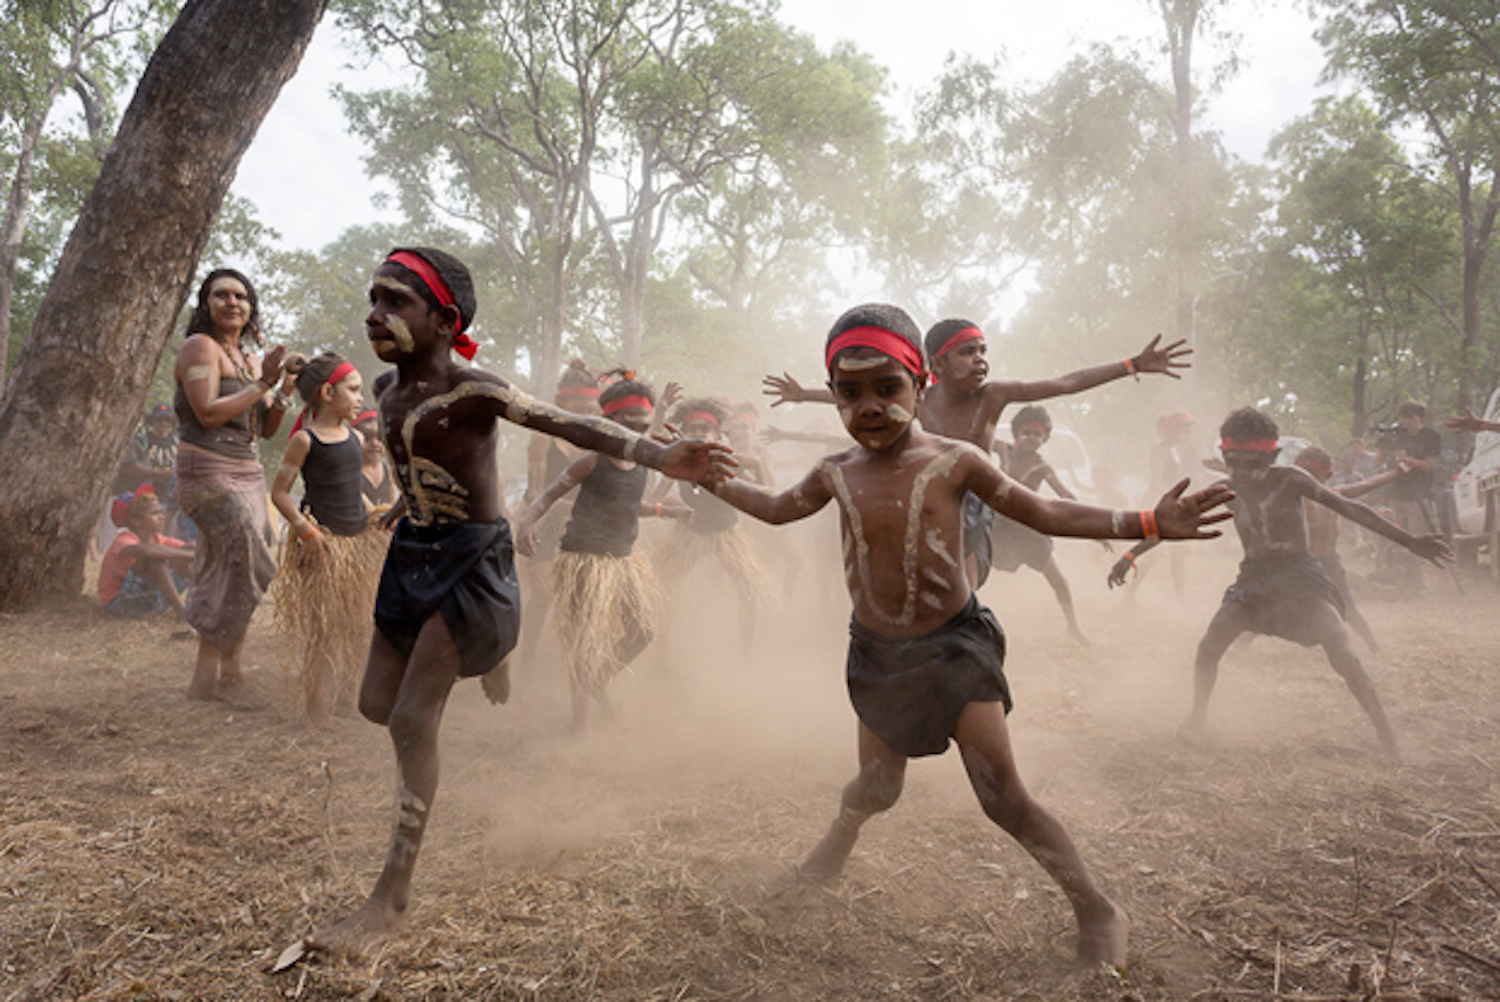 One of the unique and exclusive Australian experiences is a visit to the Laura Festival to see aboriginal ceremonies